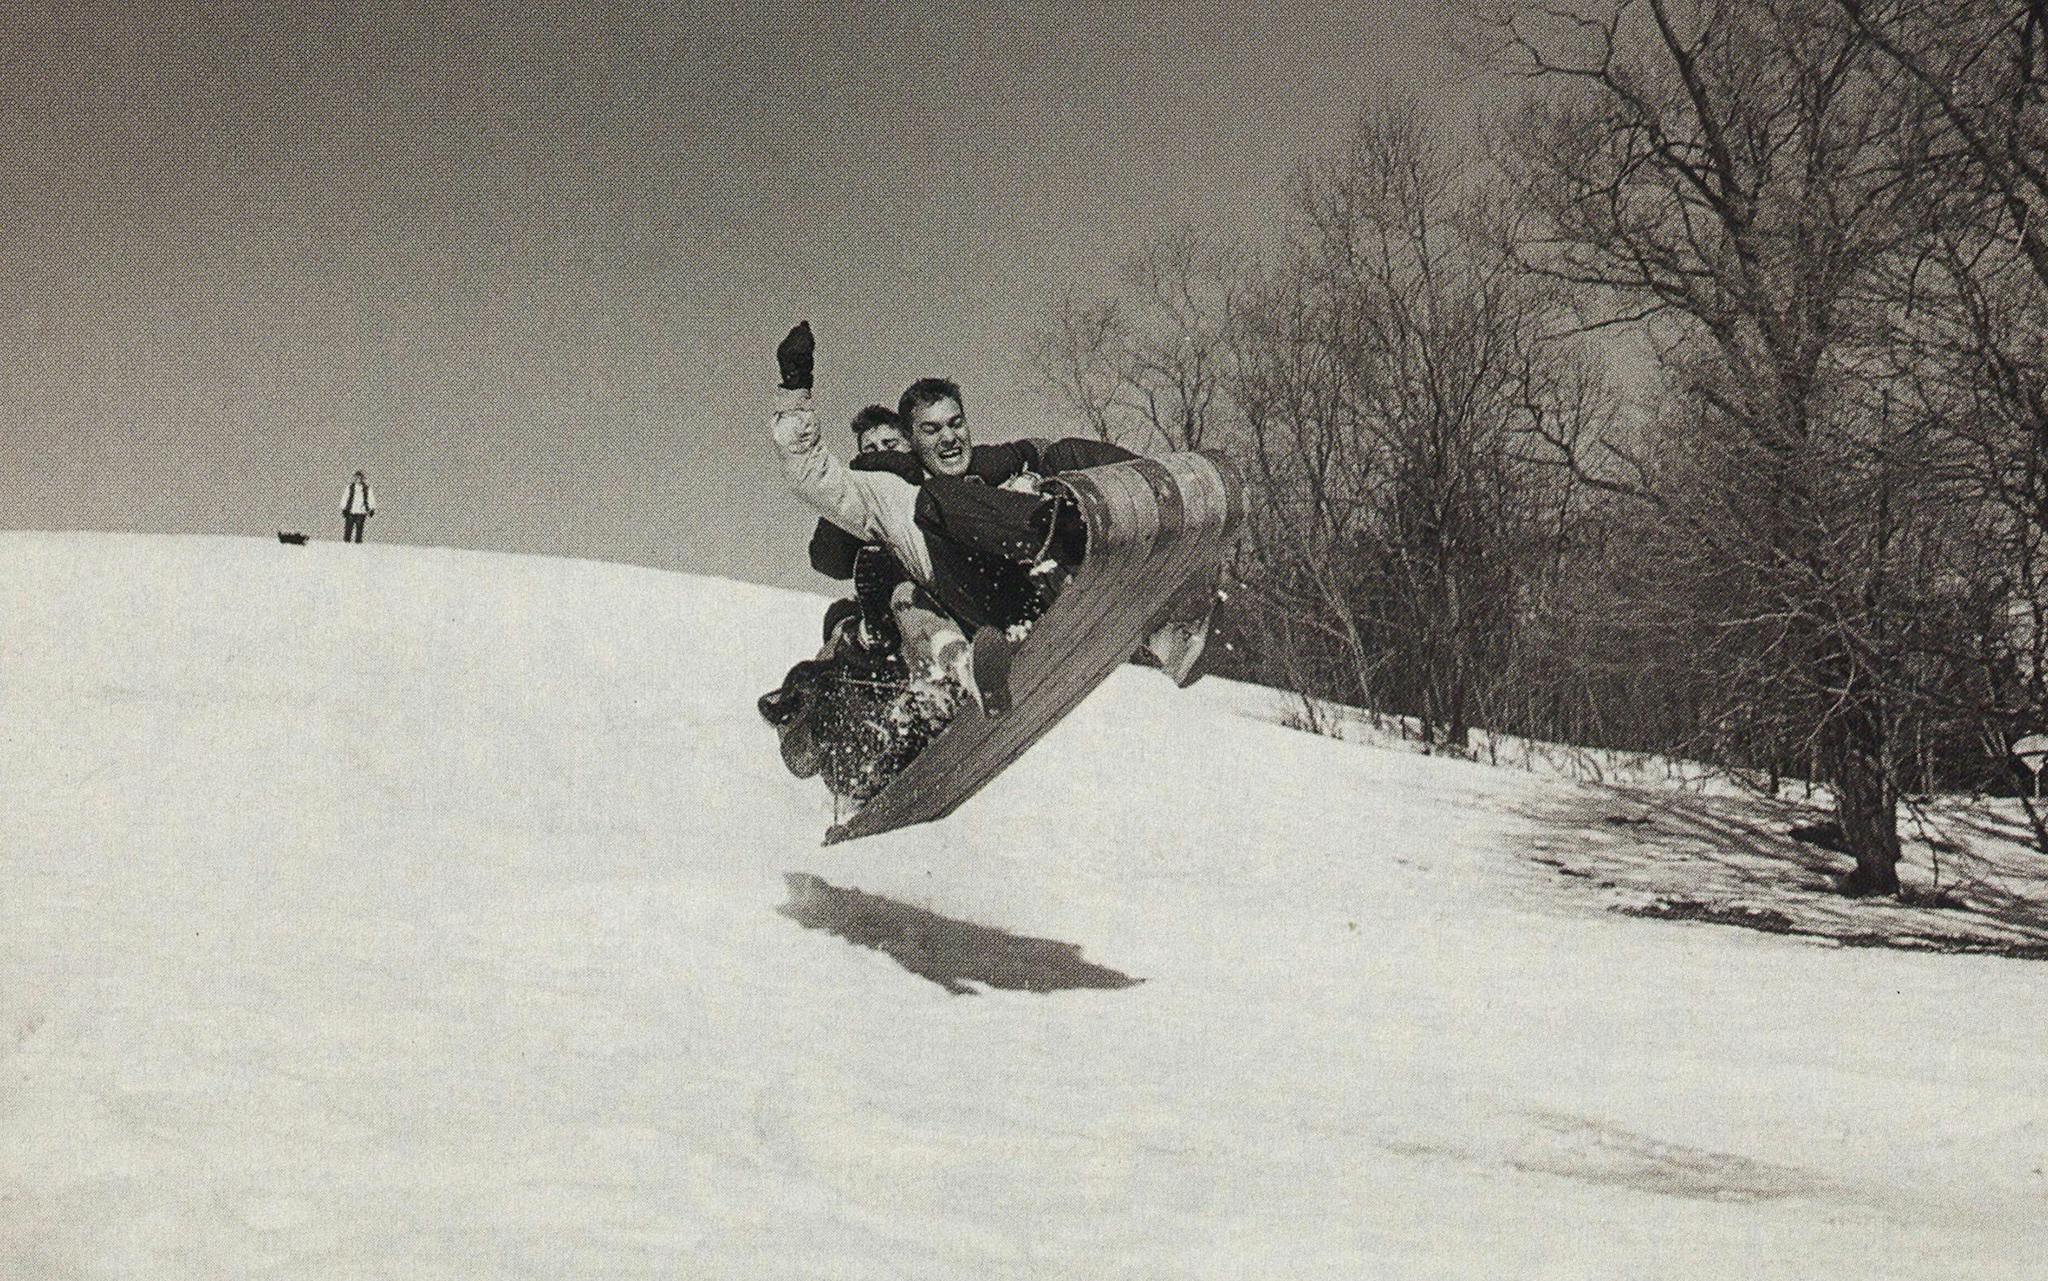 Andrew and Luke Wilson on an air-born sled.